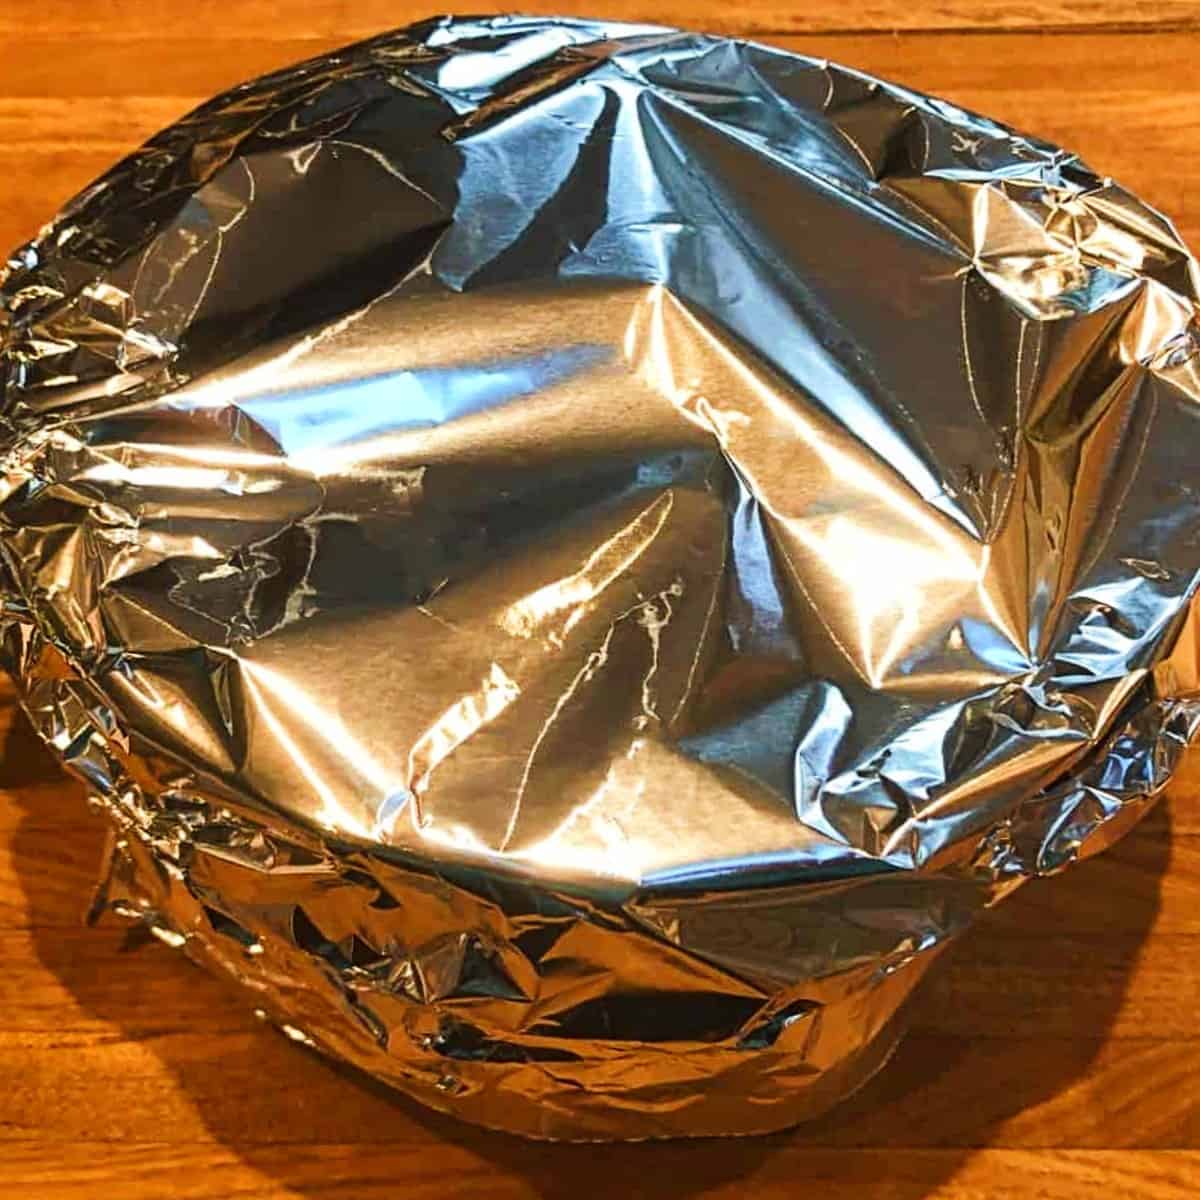 pan with cranberries wrapped in foil.